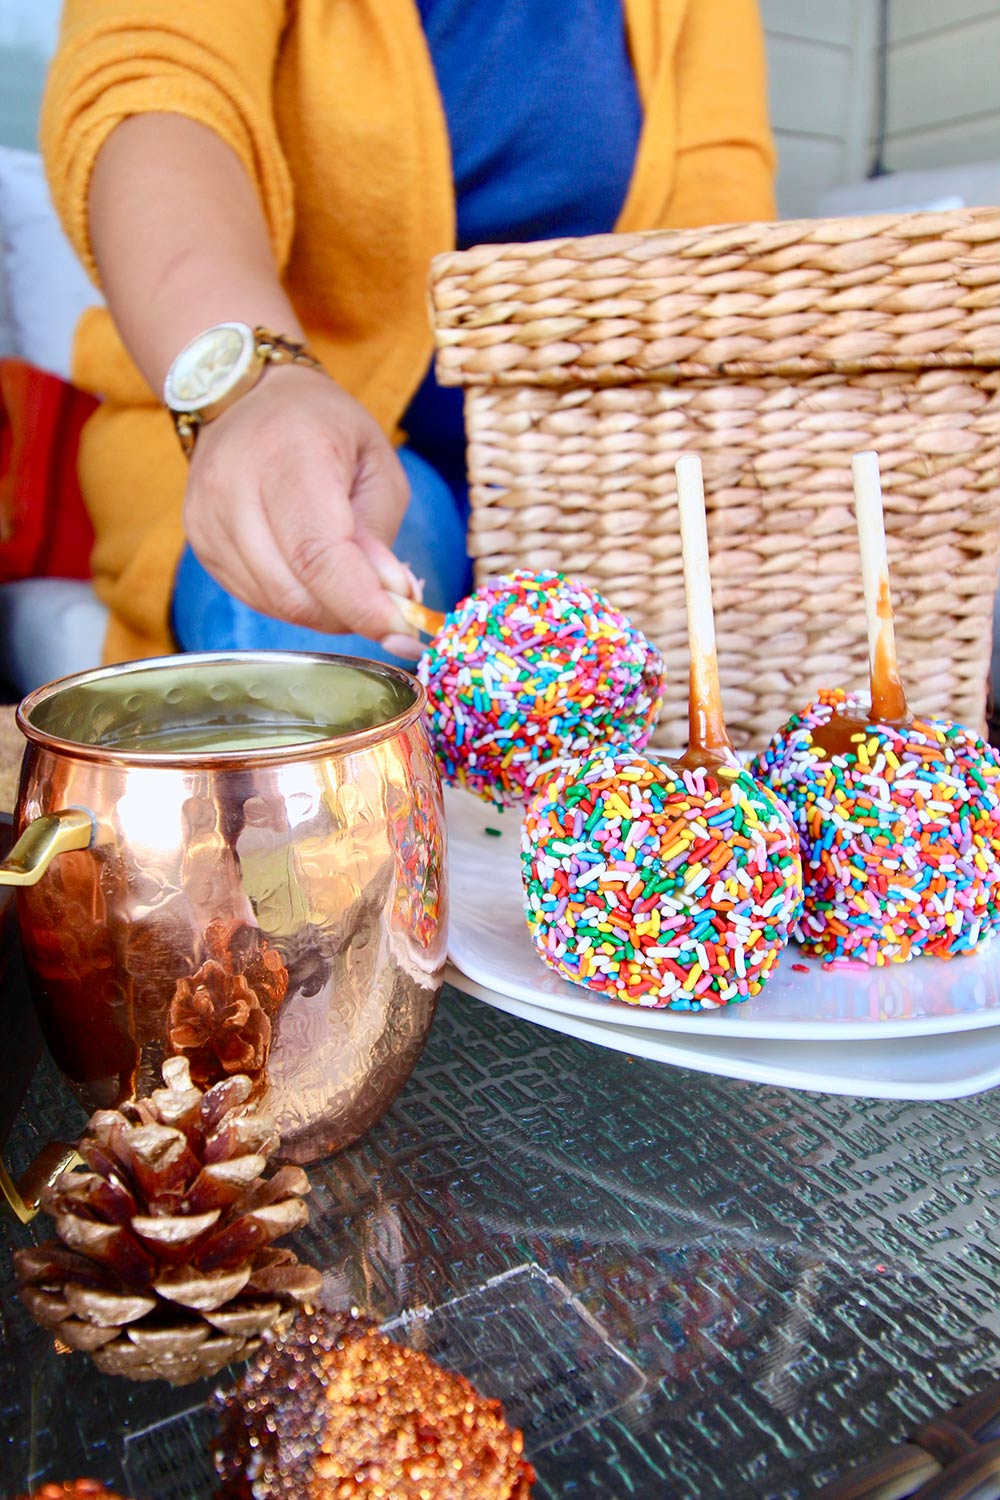 A plateful of candy dipped apples.